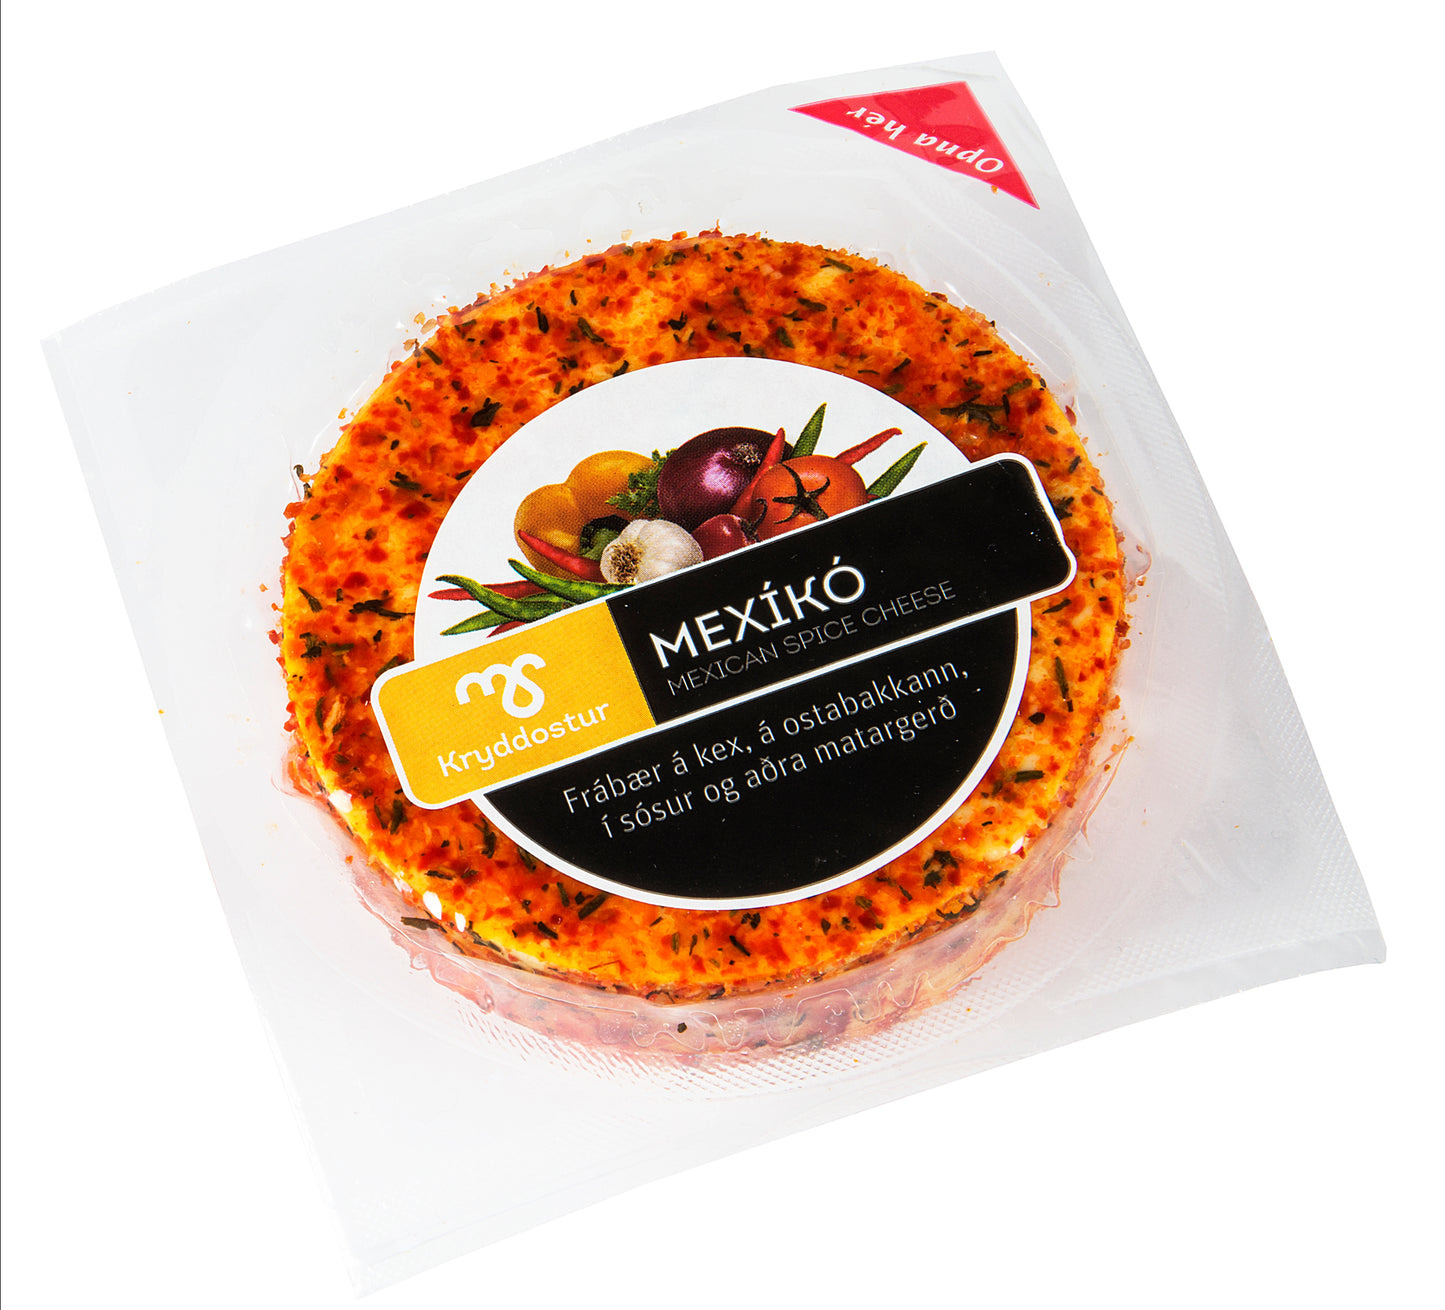 MS Mexíkó ostur / Mexico Cheese 150g